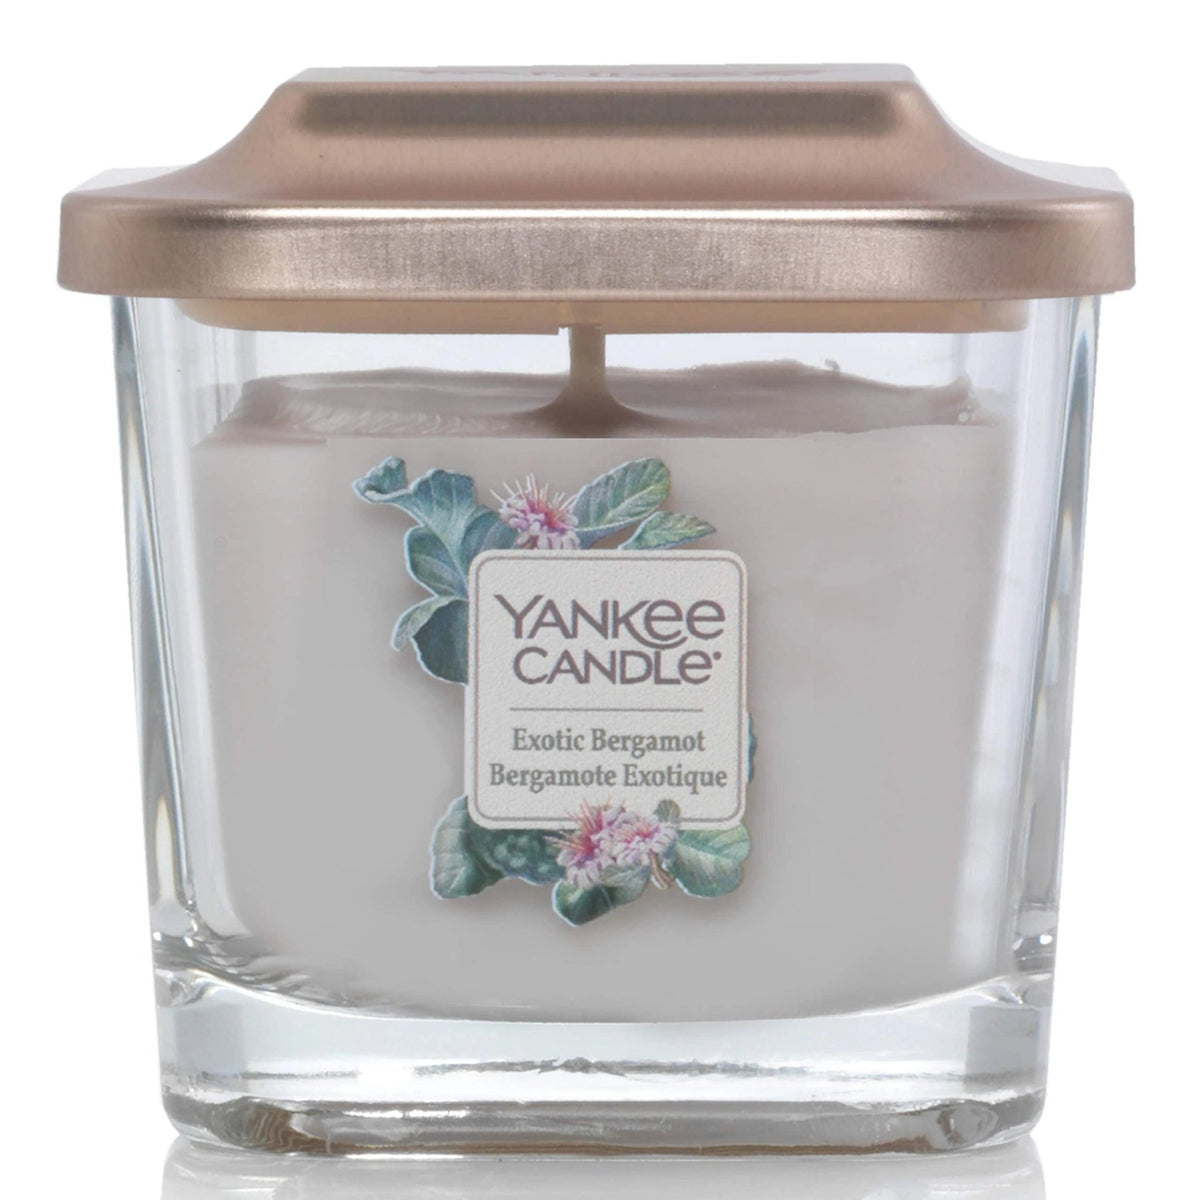 Yankee Candle Elevation Small Square Vessel Passion Flower 96 G - AllurebeautypkYankee Candle Elevation Small Square Vessel Passion Flower 96 G